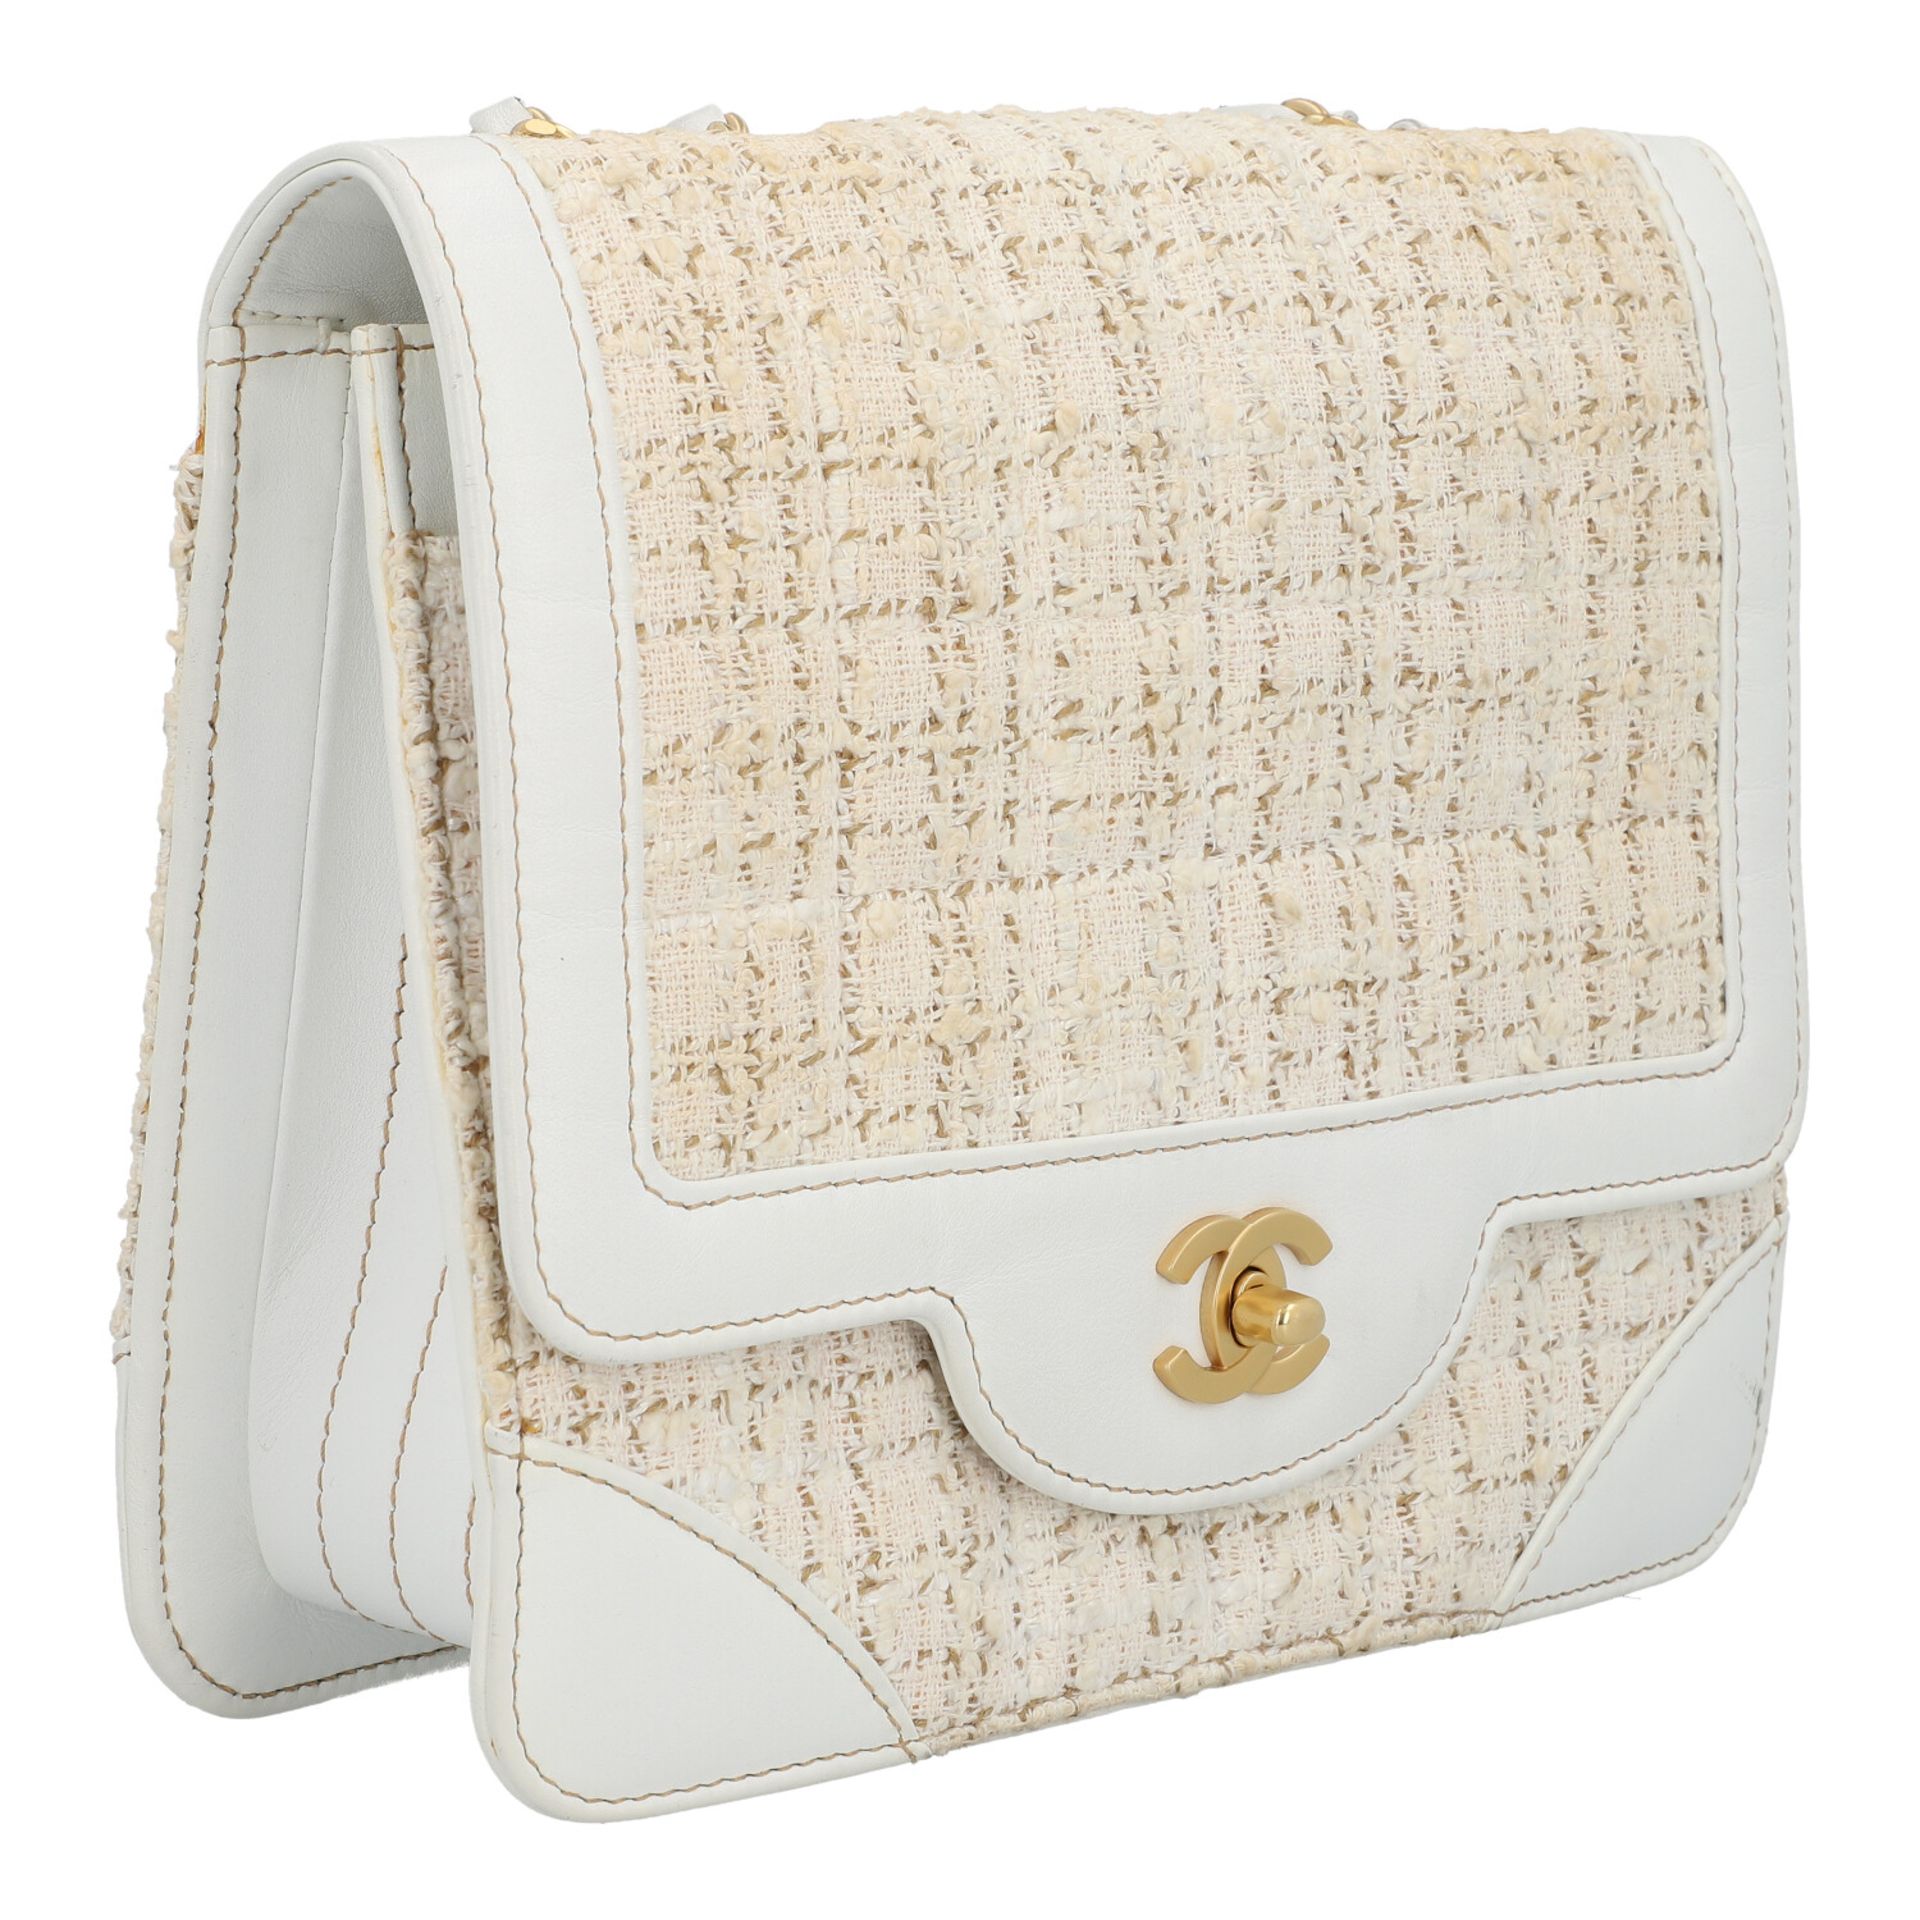 CHANEL VINTAGE Schultertasche "FLAP BAG", Koll.: 2000 - 2002. - Image 2 of 8